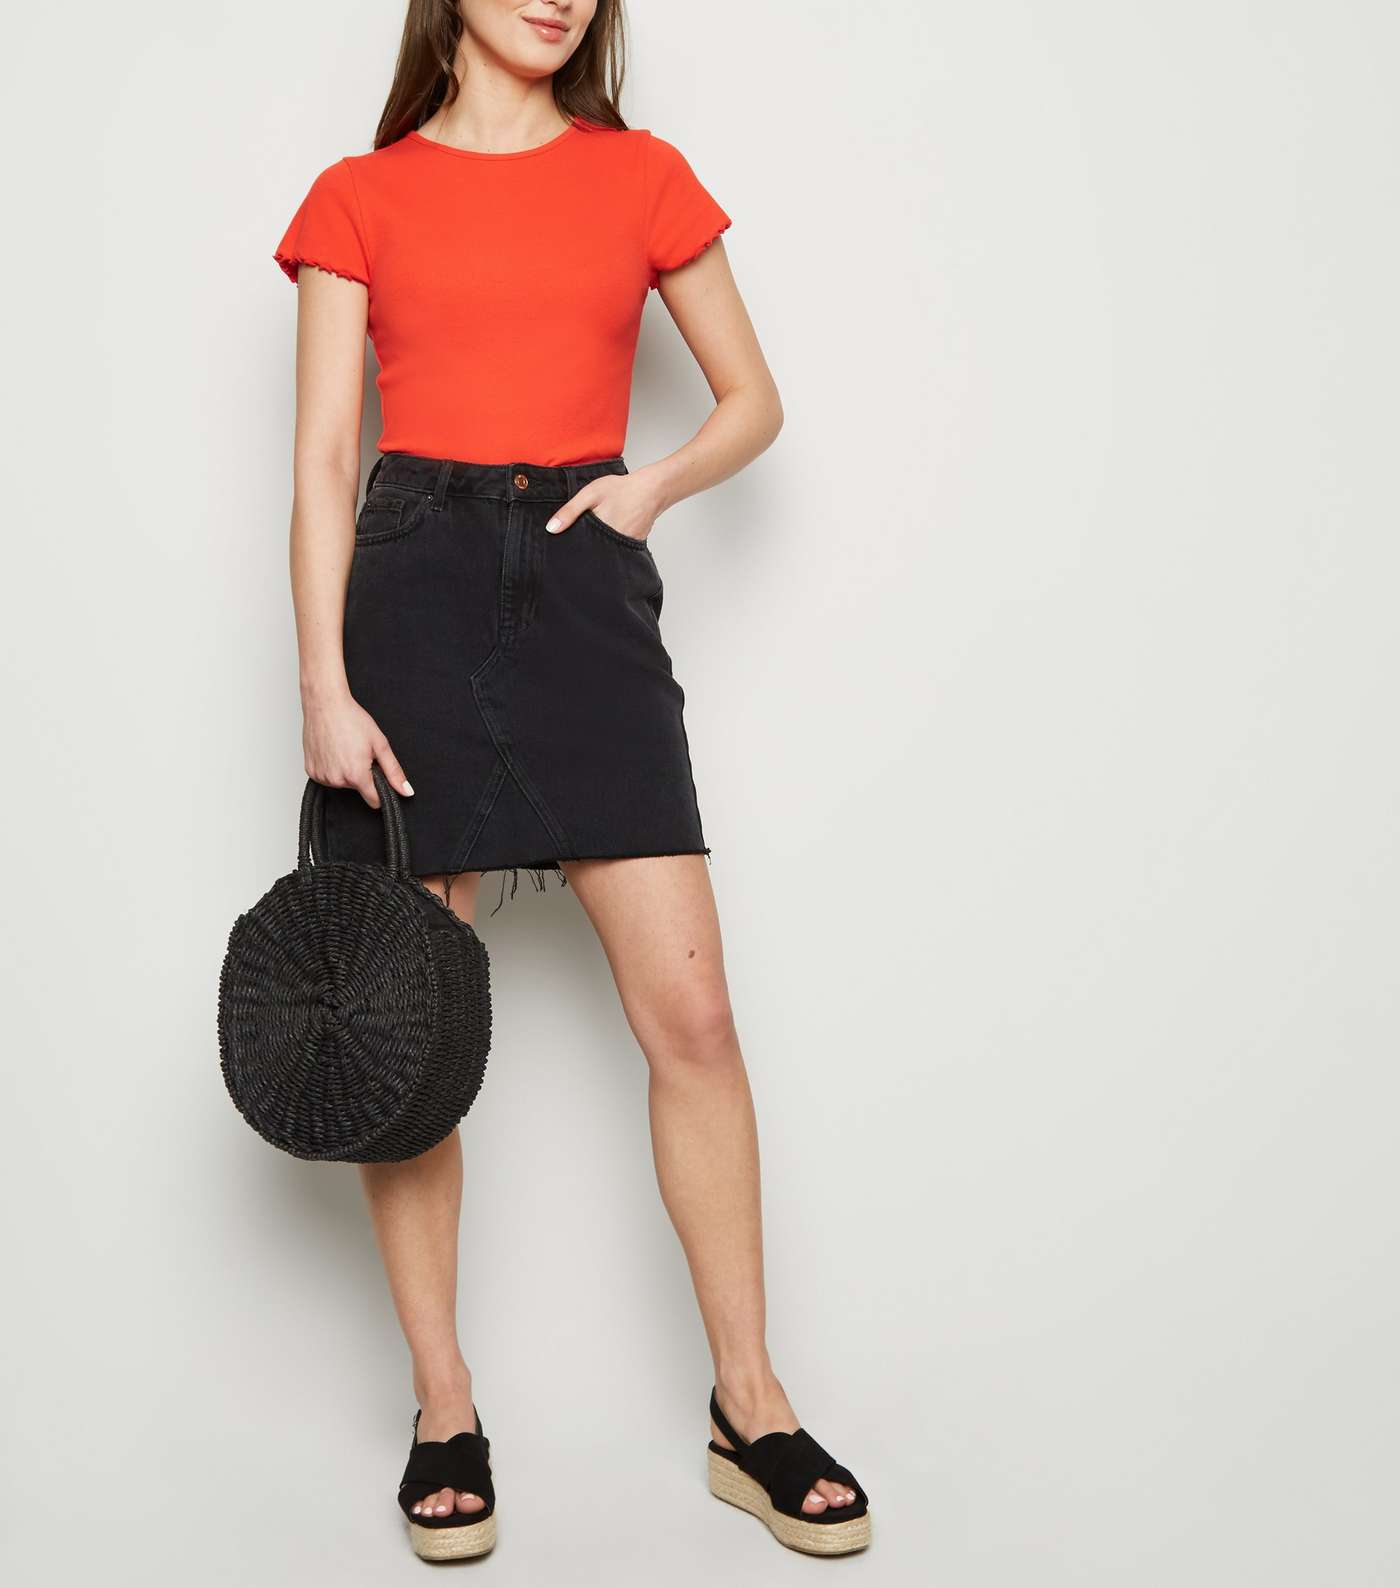 Red Ribbed Frill Trim Crop T-Shirt Image 2